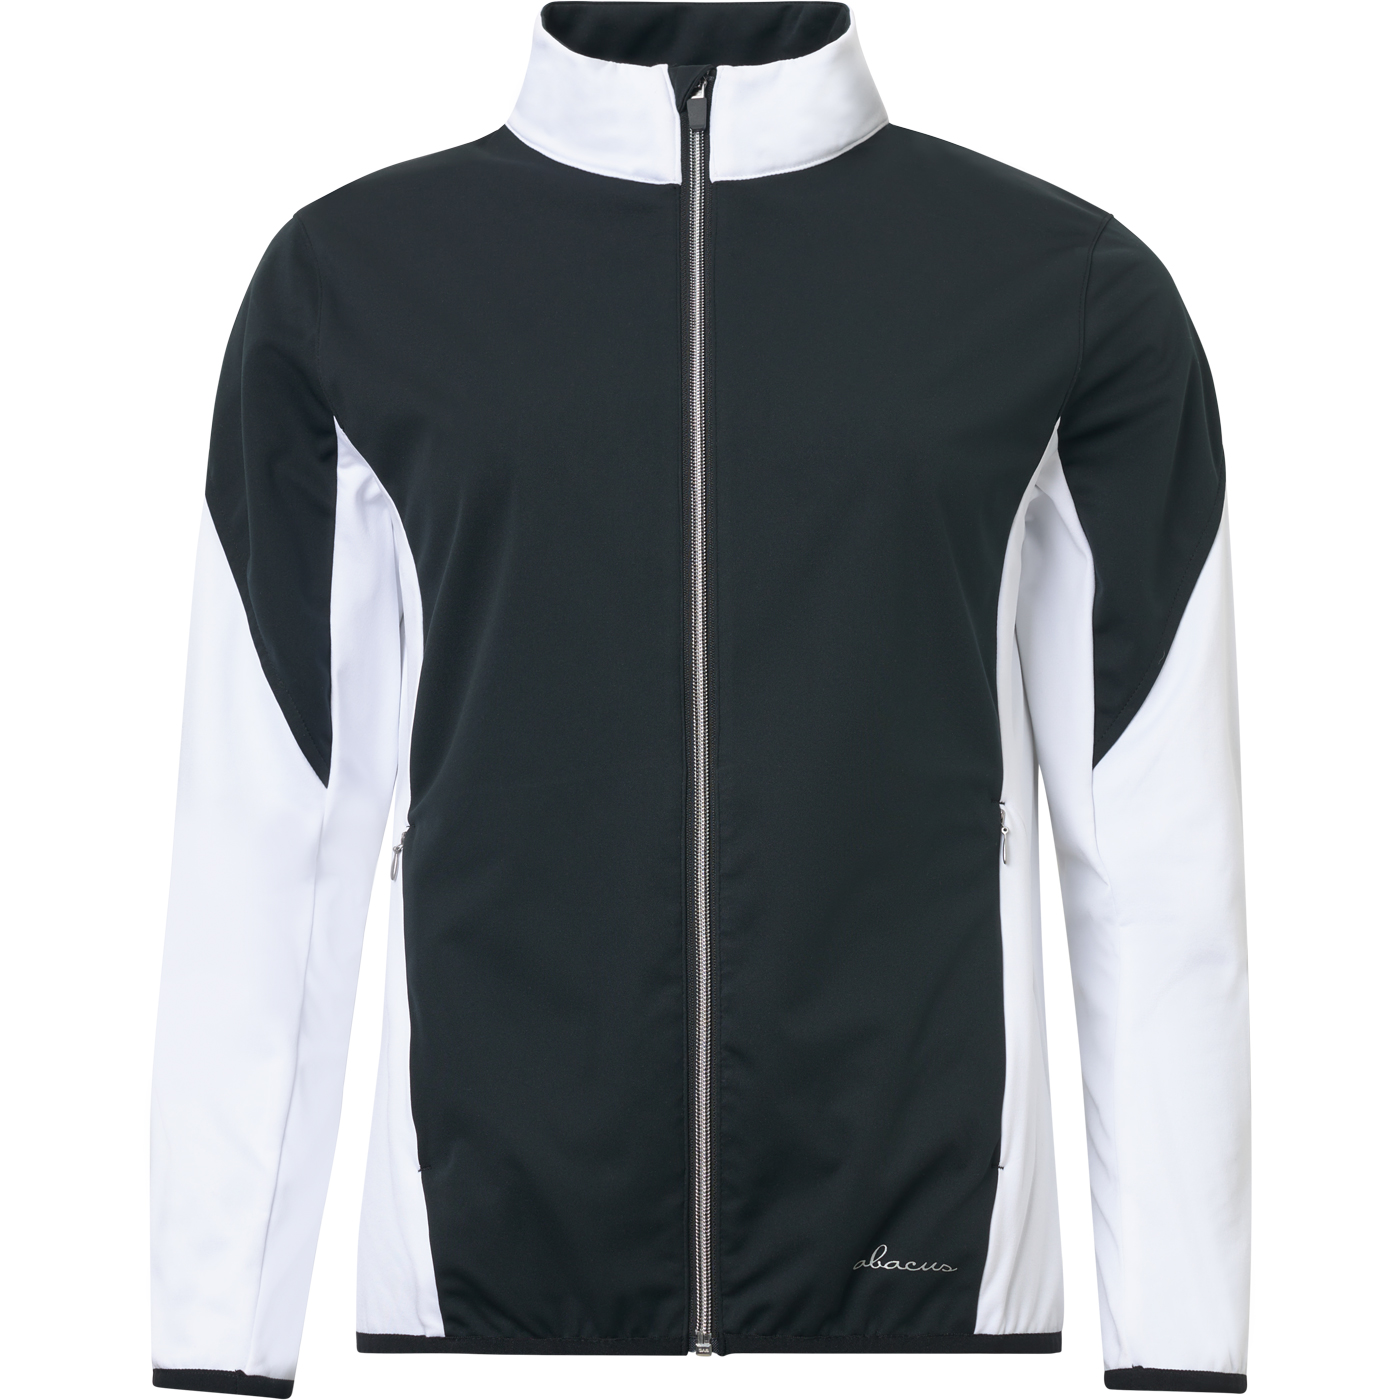 Lds Dornoch softshell hybrid jacket - black/white in the group WOMEN / All clothing at Abacus Sportswear (2287620)